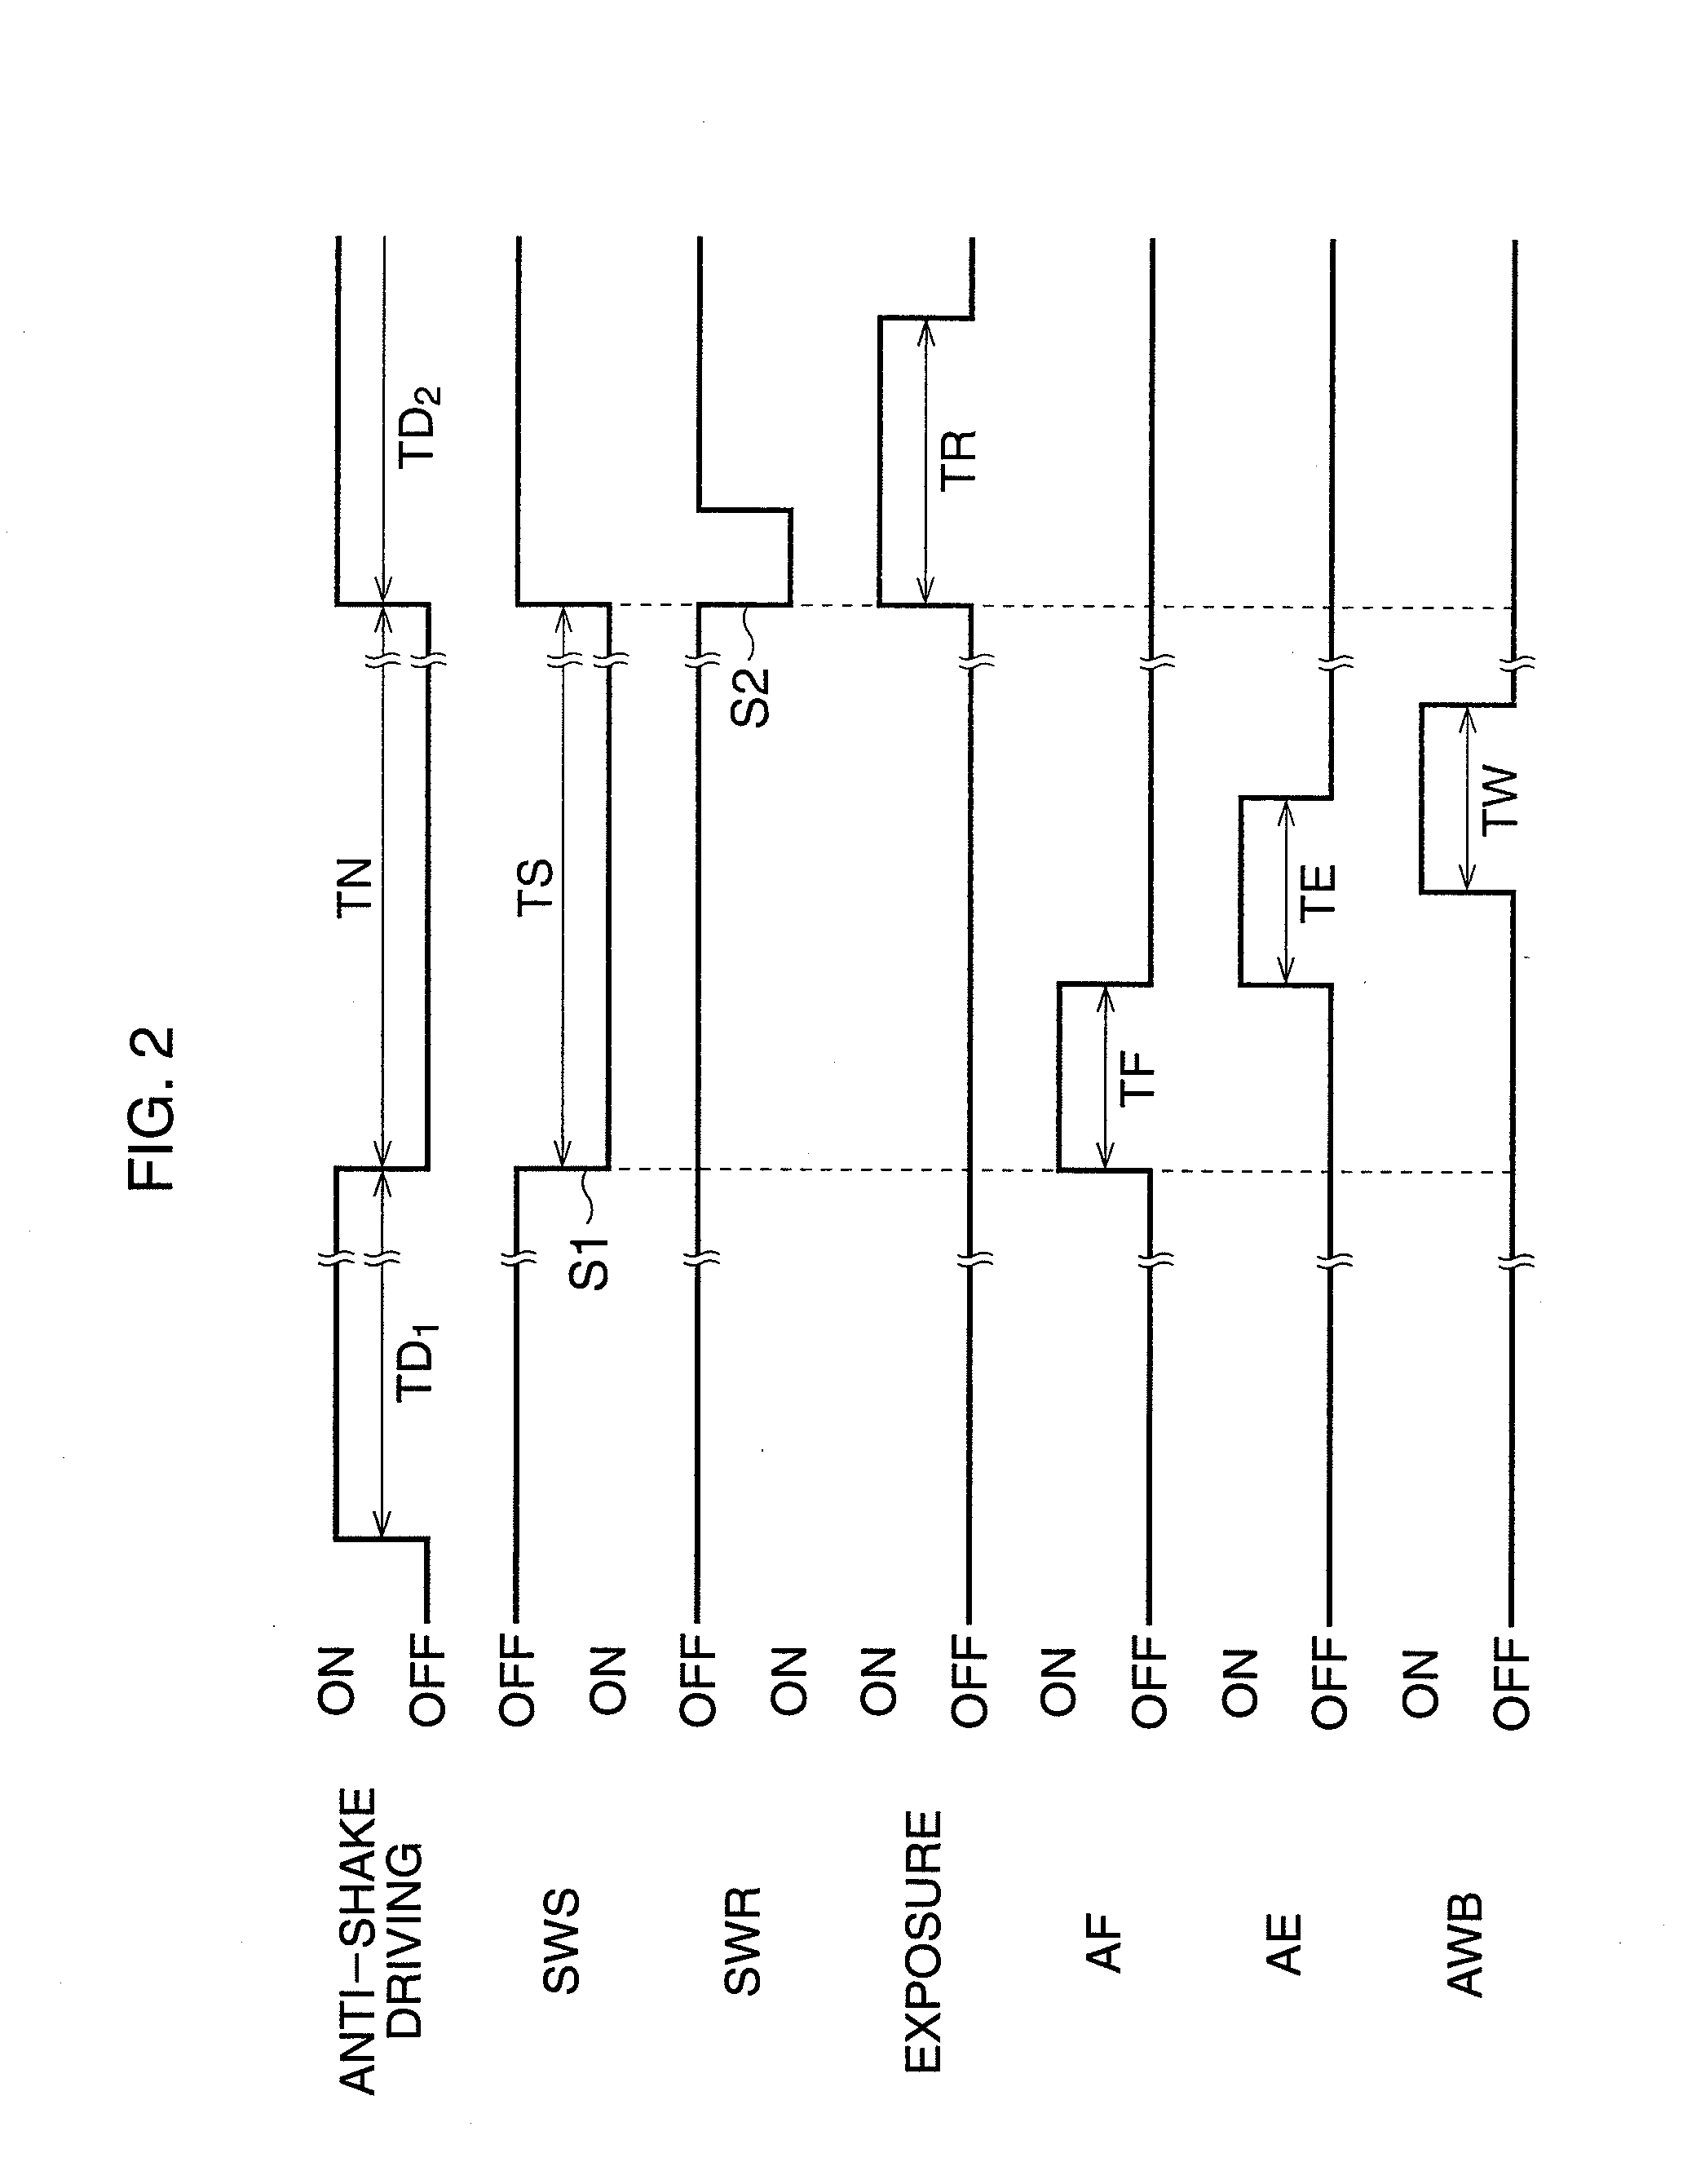 Photographic device with Anti-shake function